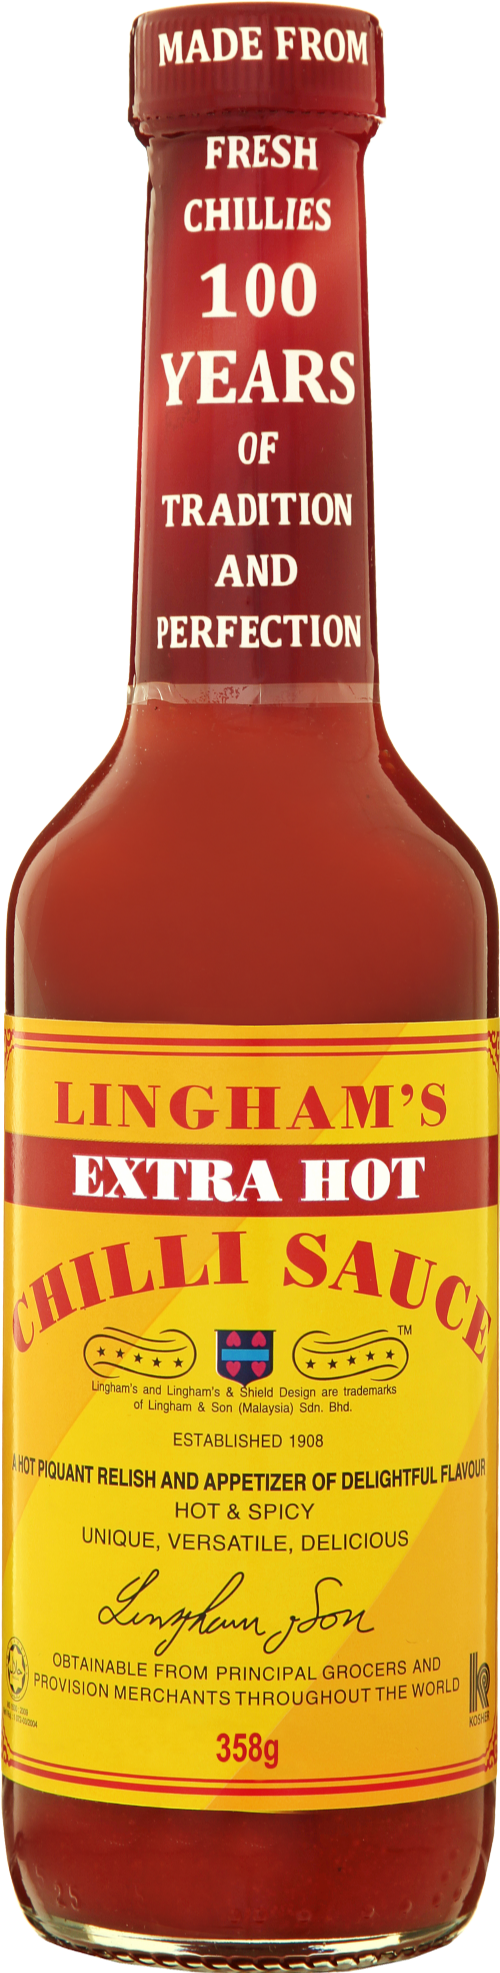 LINGHAM'S Extra Hot Chilli Sauce 358g